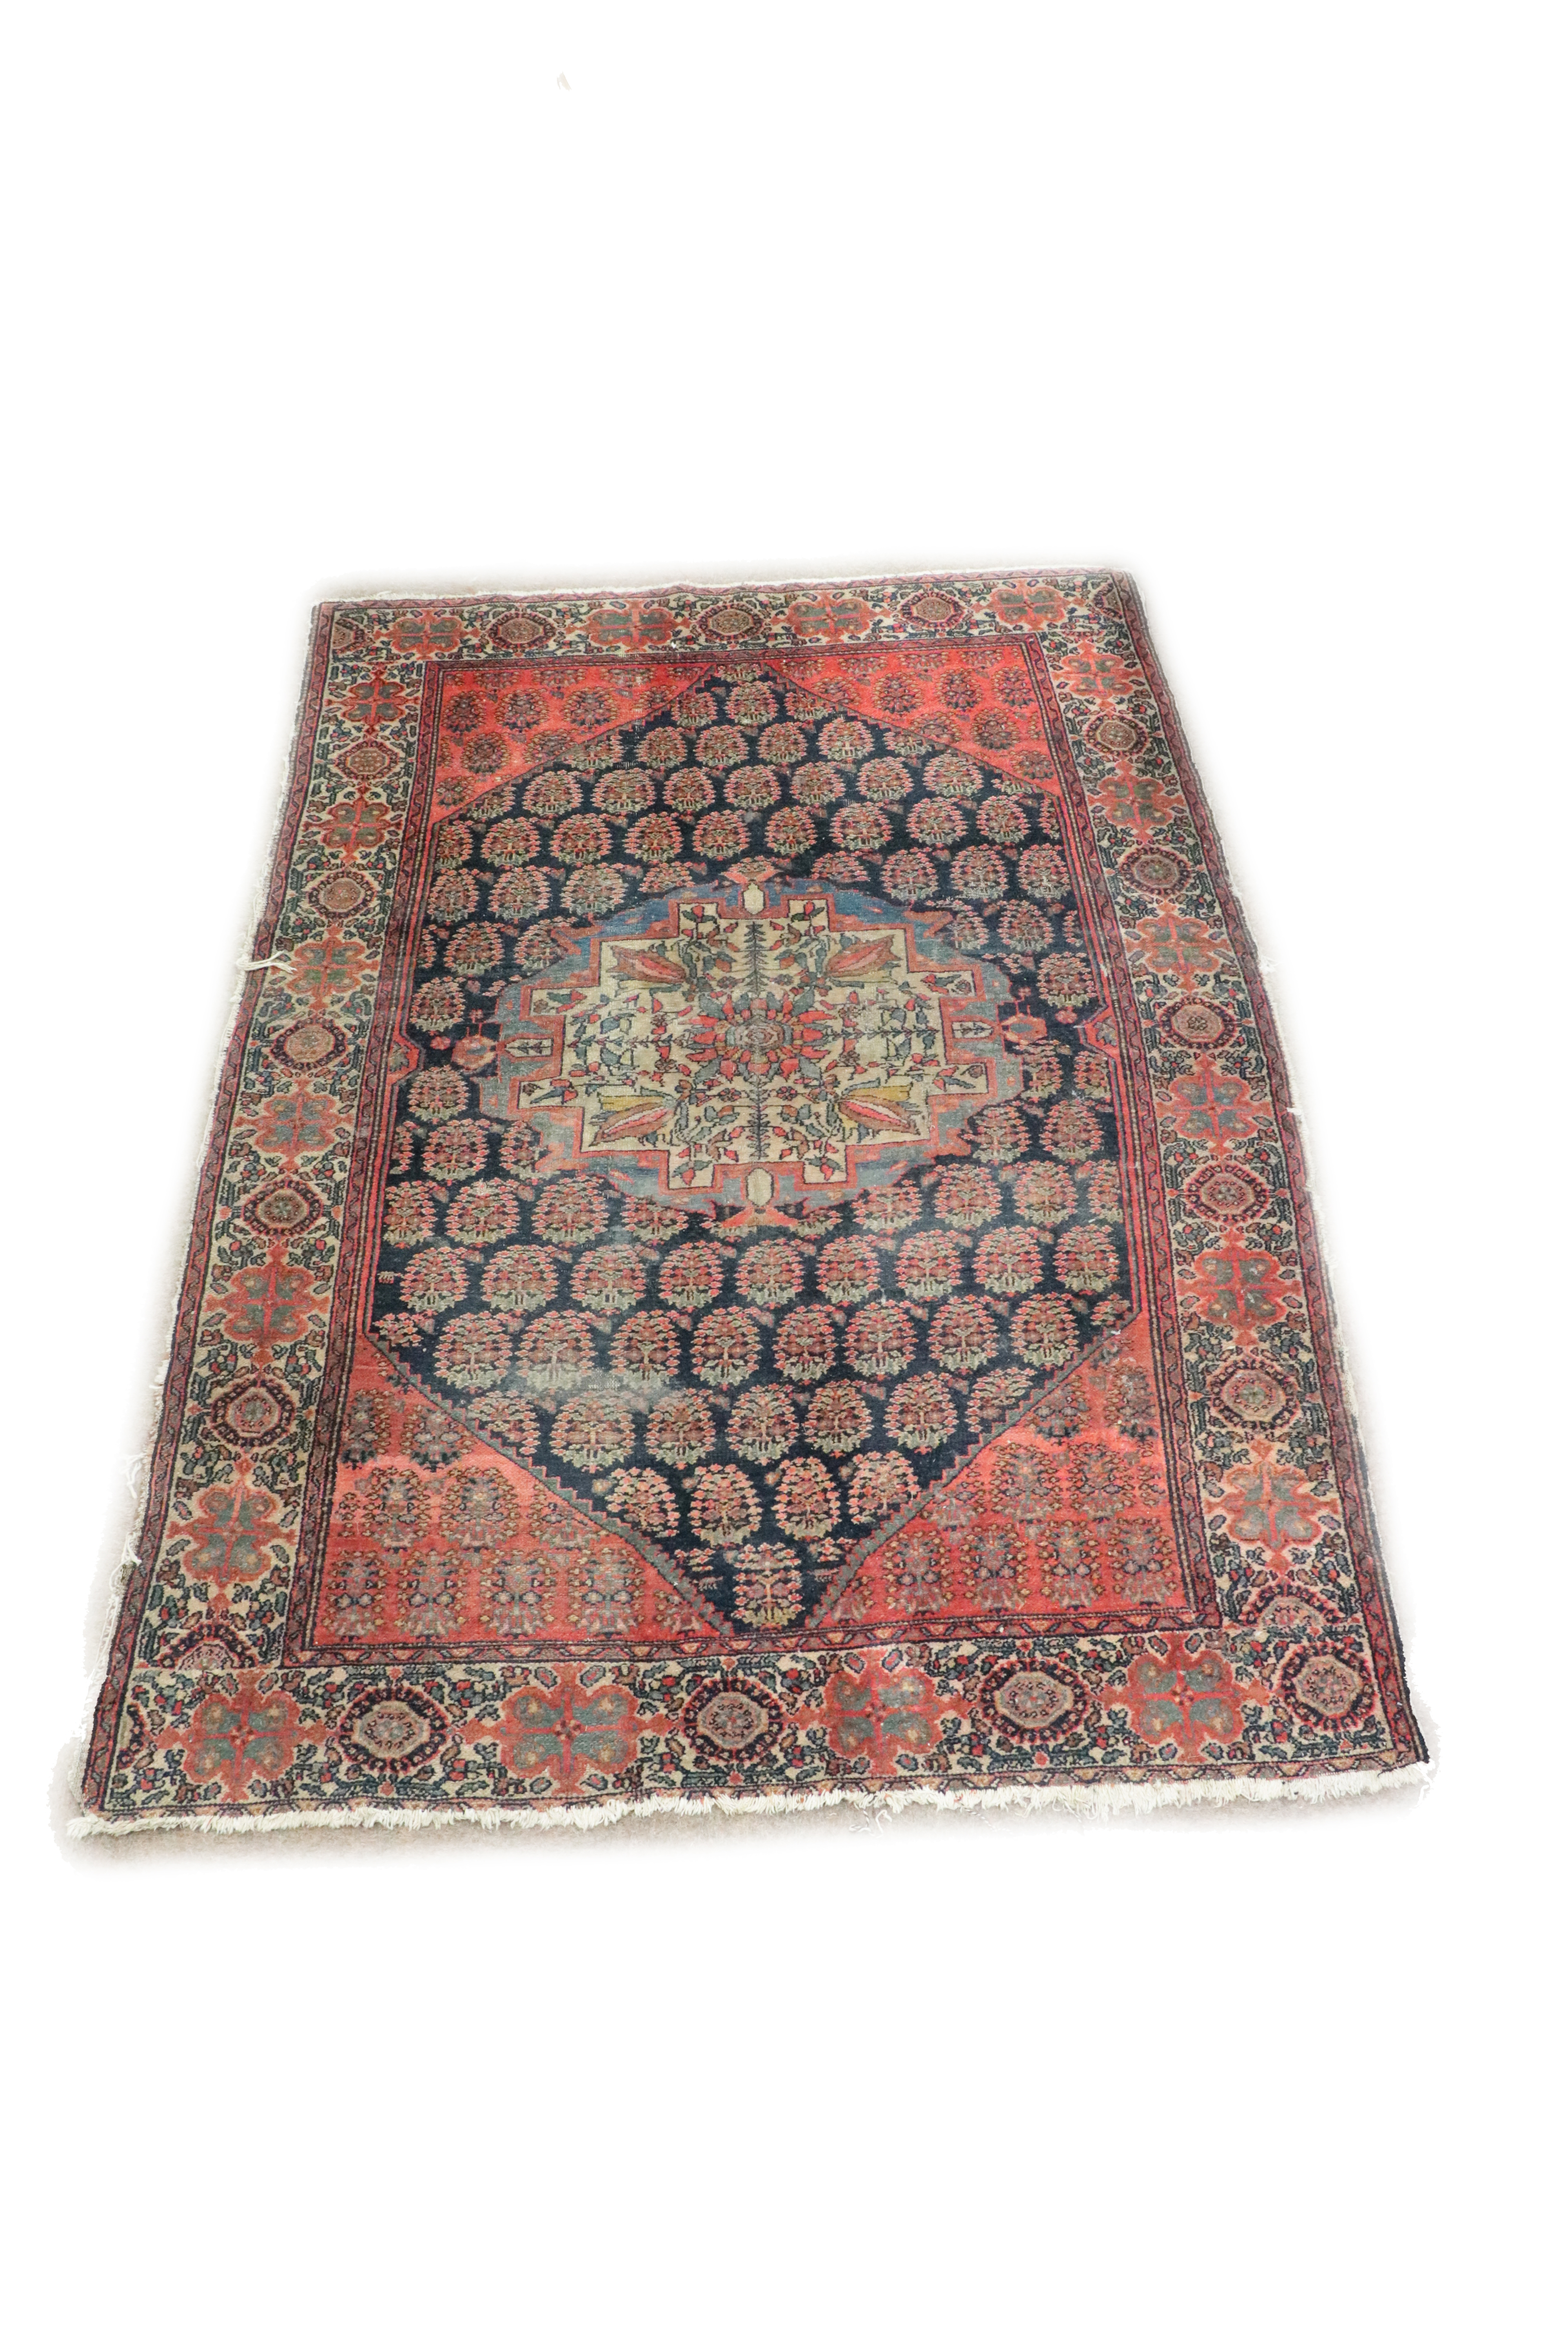 An antique Middle Eastern woolen Carpet, (possibly Persian), t